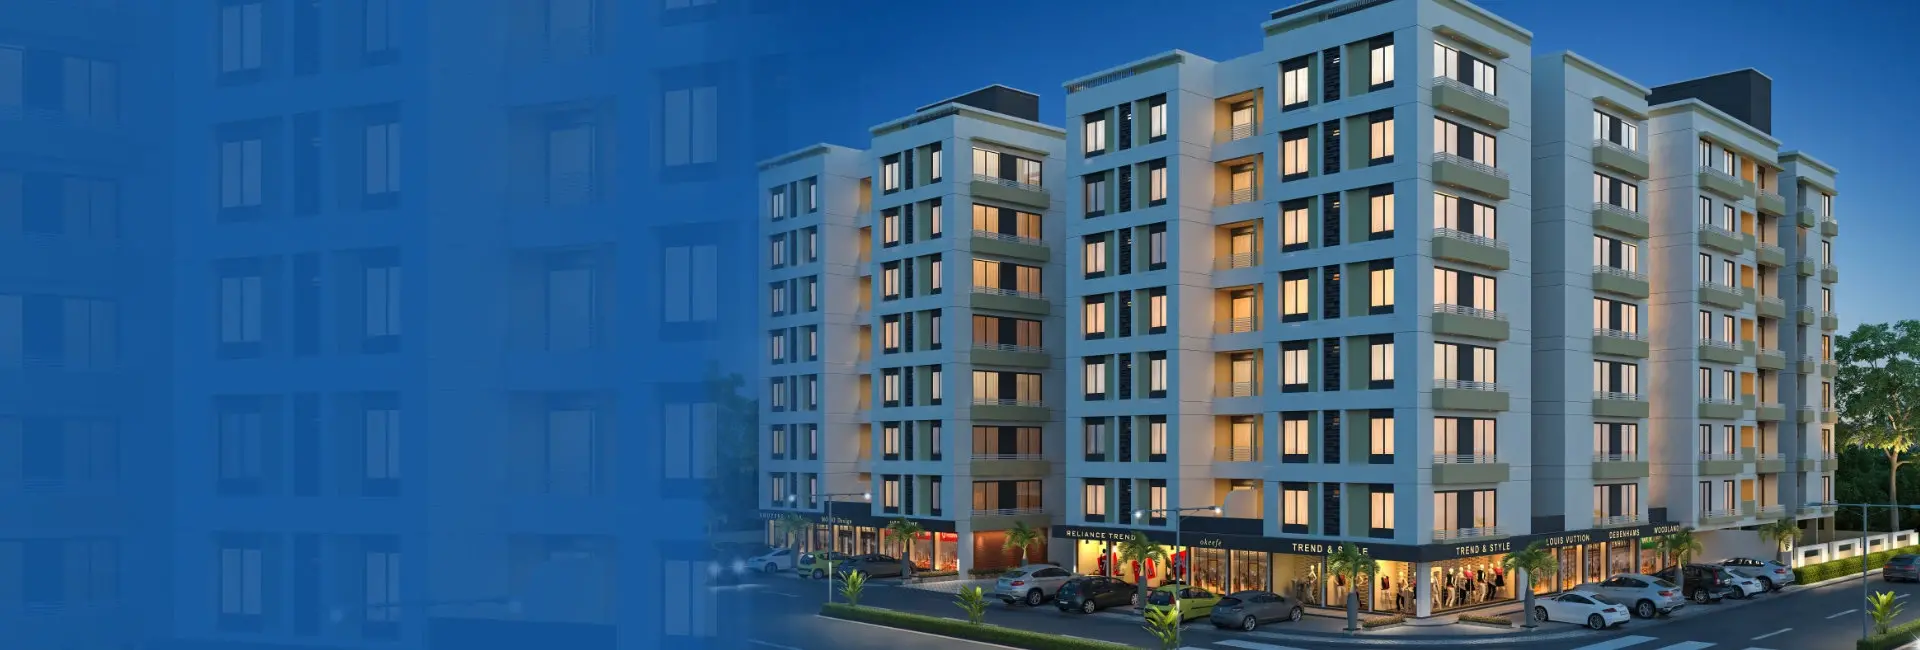 Residential and Commercial building in Vadodara - Shree Siddheshwar Holiness